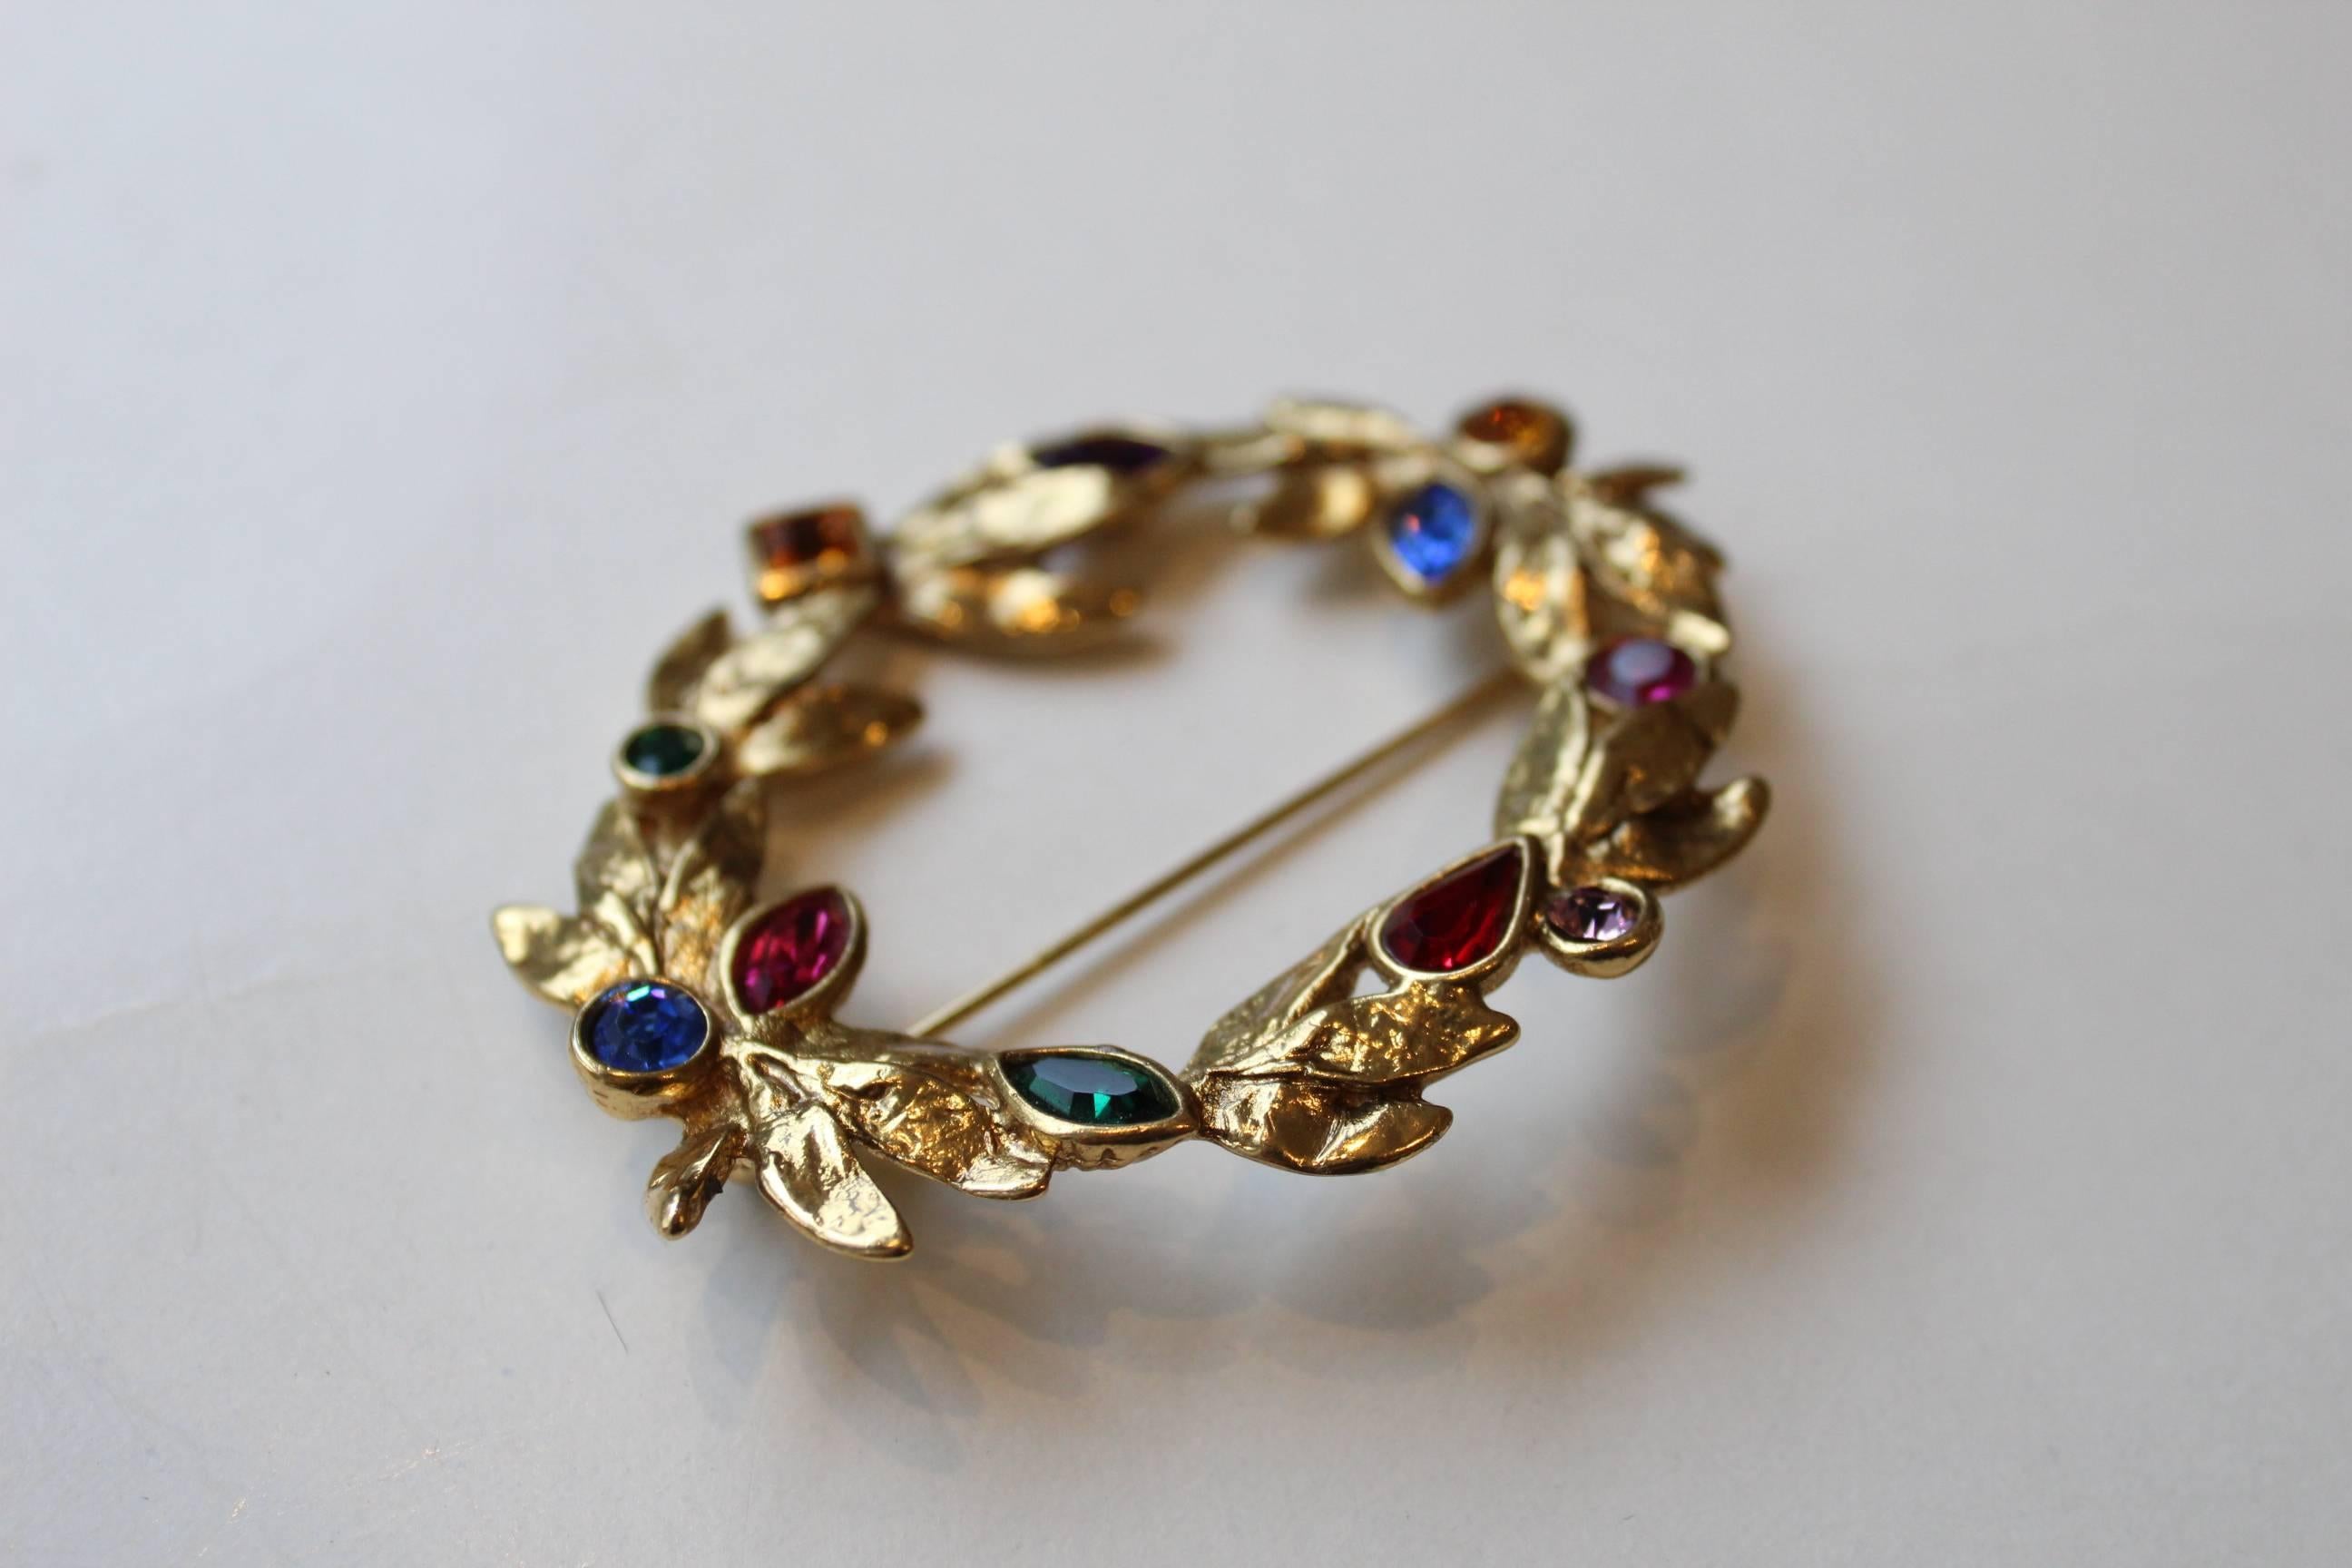 Super nice brooche from Yves saint Laurent in gold plated metal and colorful stoneS.

Size 8 x 6,5 cm

